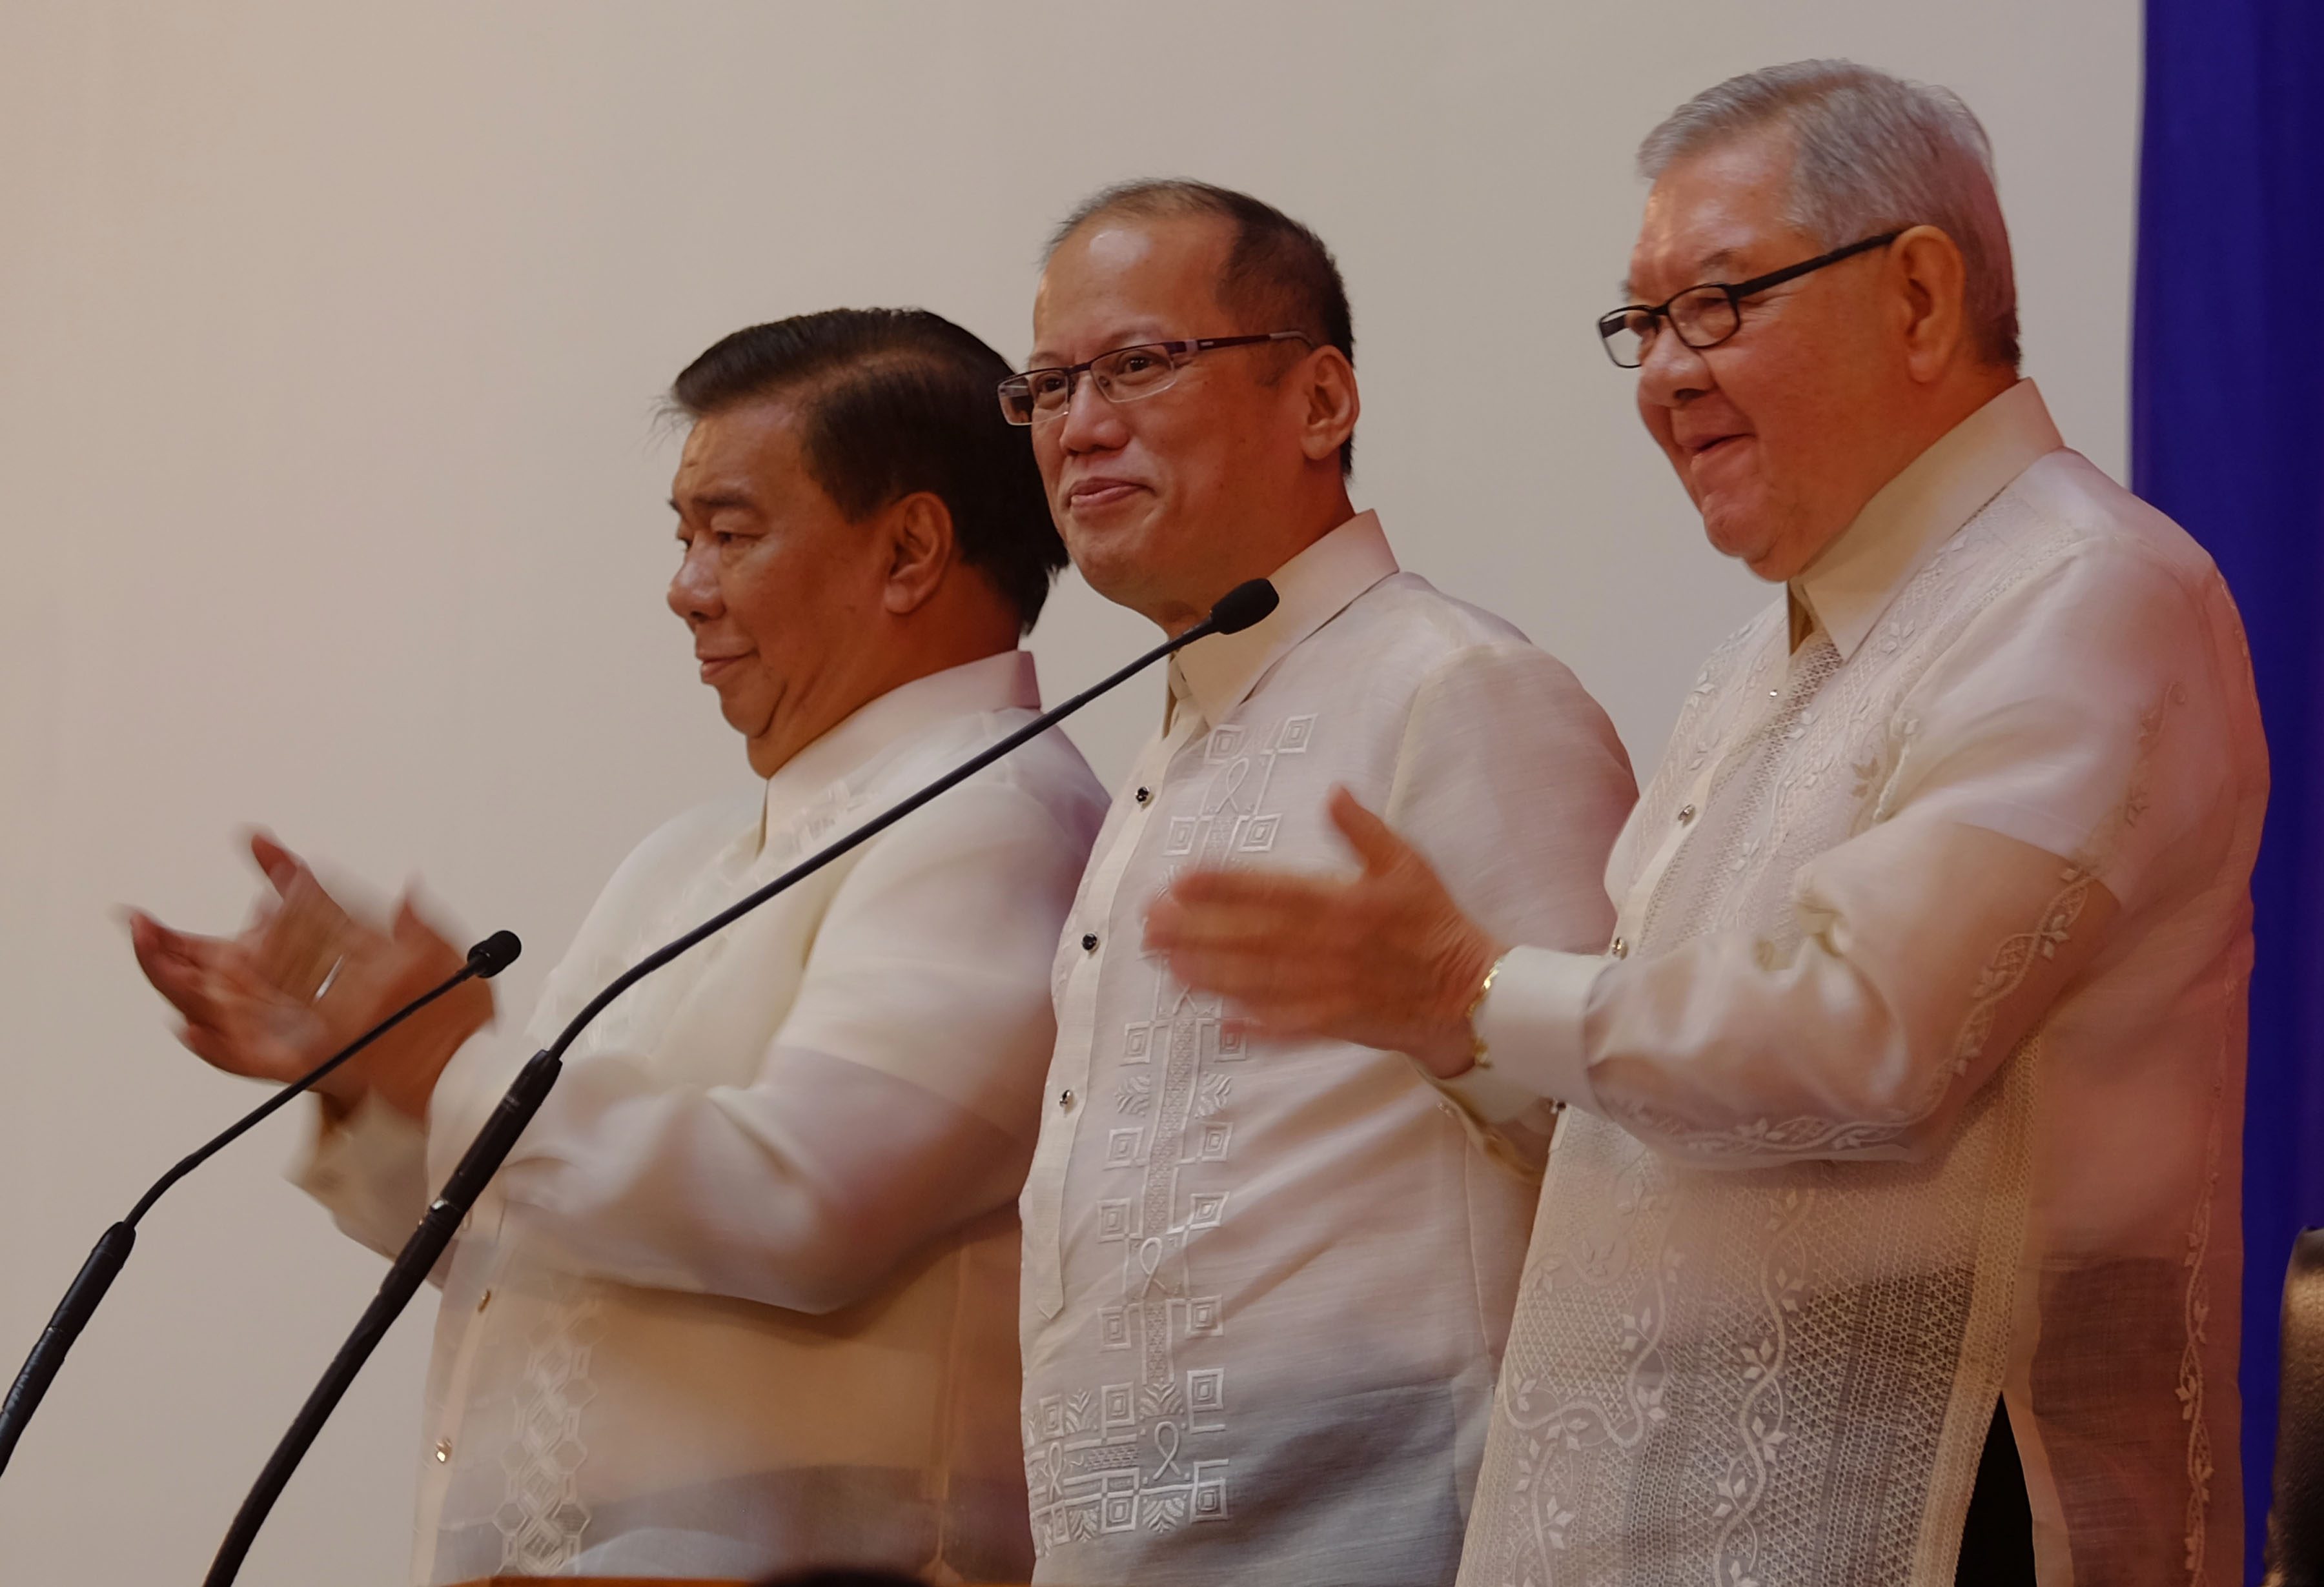 President Benigno S. Aquino III is shown with House Speaker Feliciano Belmonte, Jr. and Senate President Franklin Drilon, before delivering his 6th and last State of the Nation Address (SONA) during the Joint Session of the 16th Congress at the Session Hall of the House of Representatives Complex in Constitution Hills, Quezon City on Monday (July 27, 2015). (Photo by Gil Nartea / Malacañang Photo Bureau) 